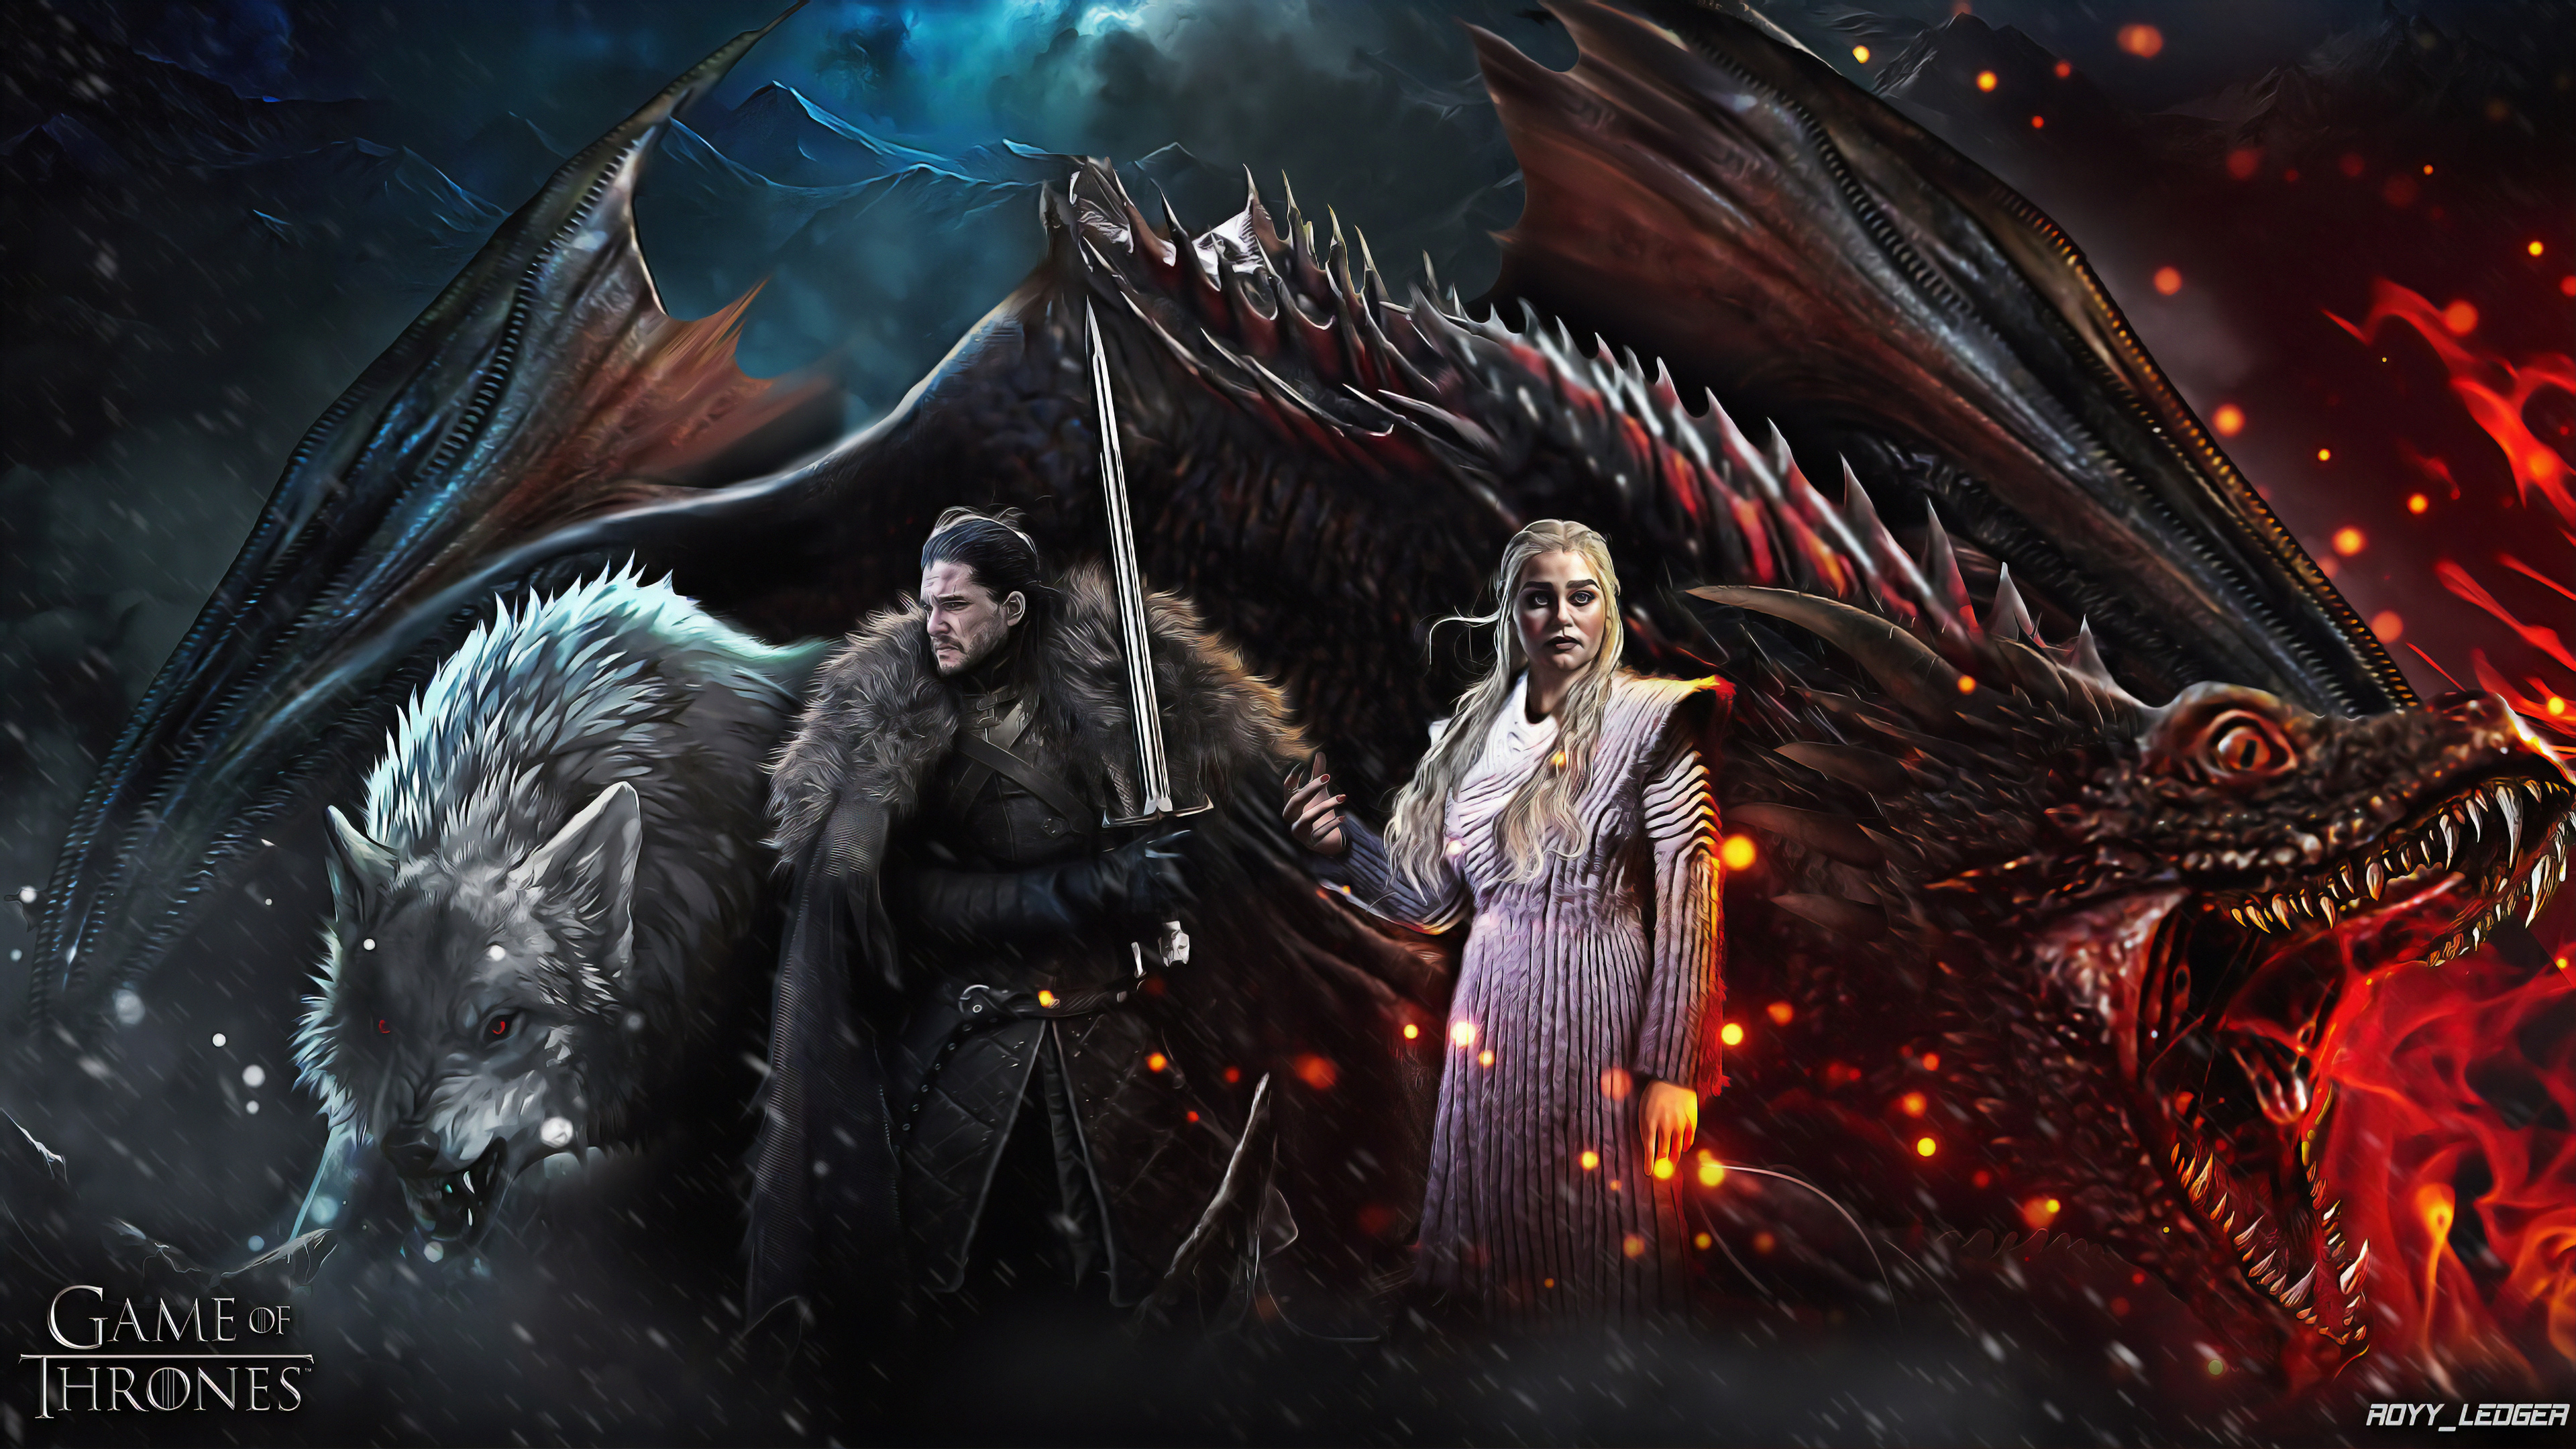 brian hackett recommends Game Of Thrones 1080p